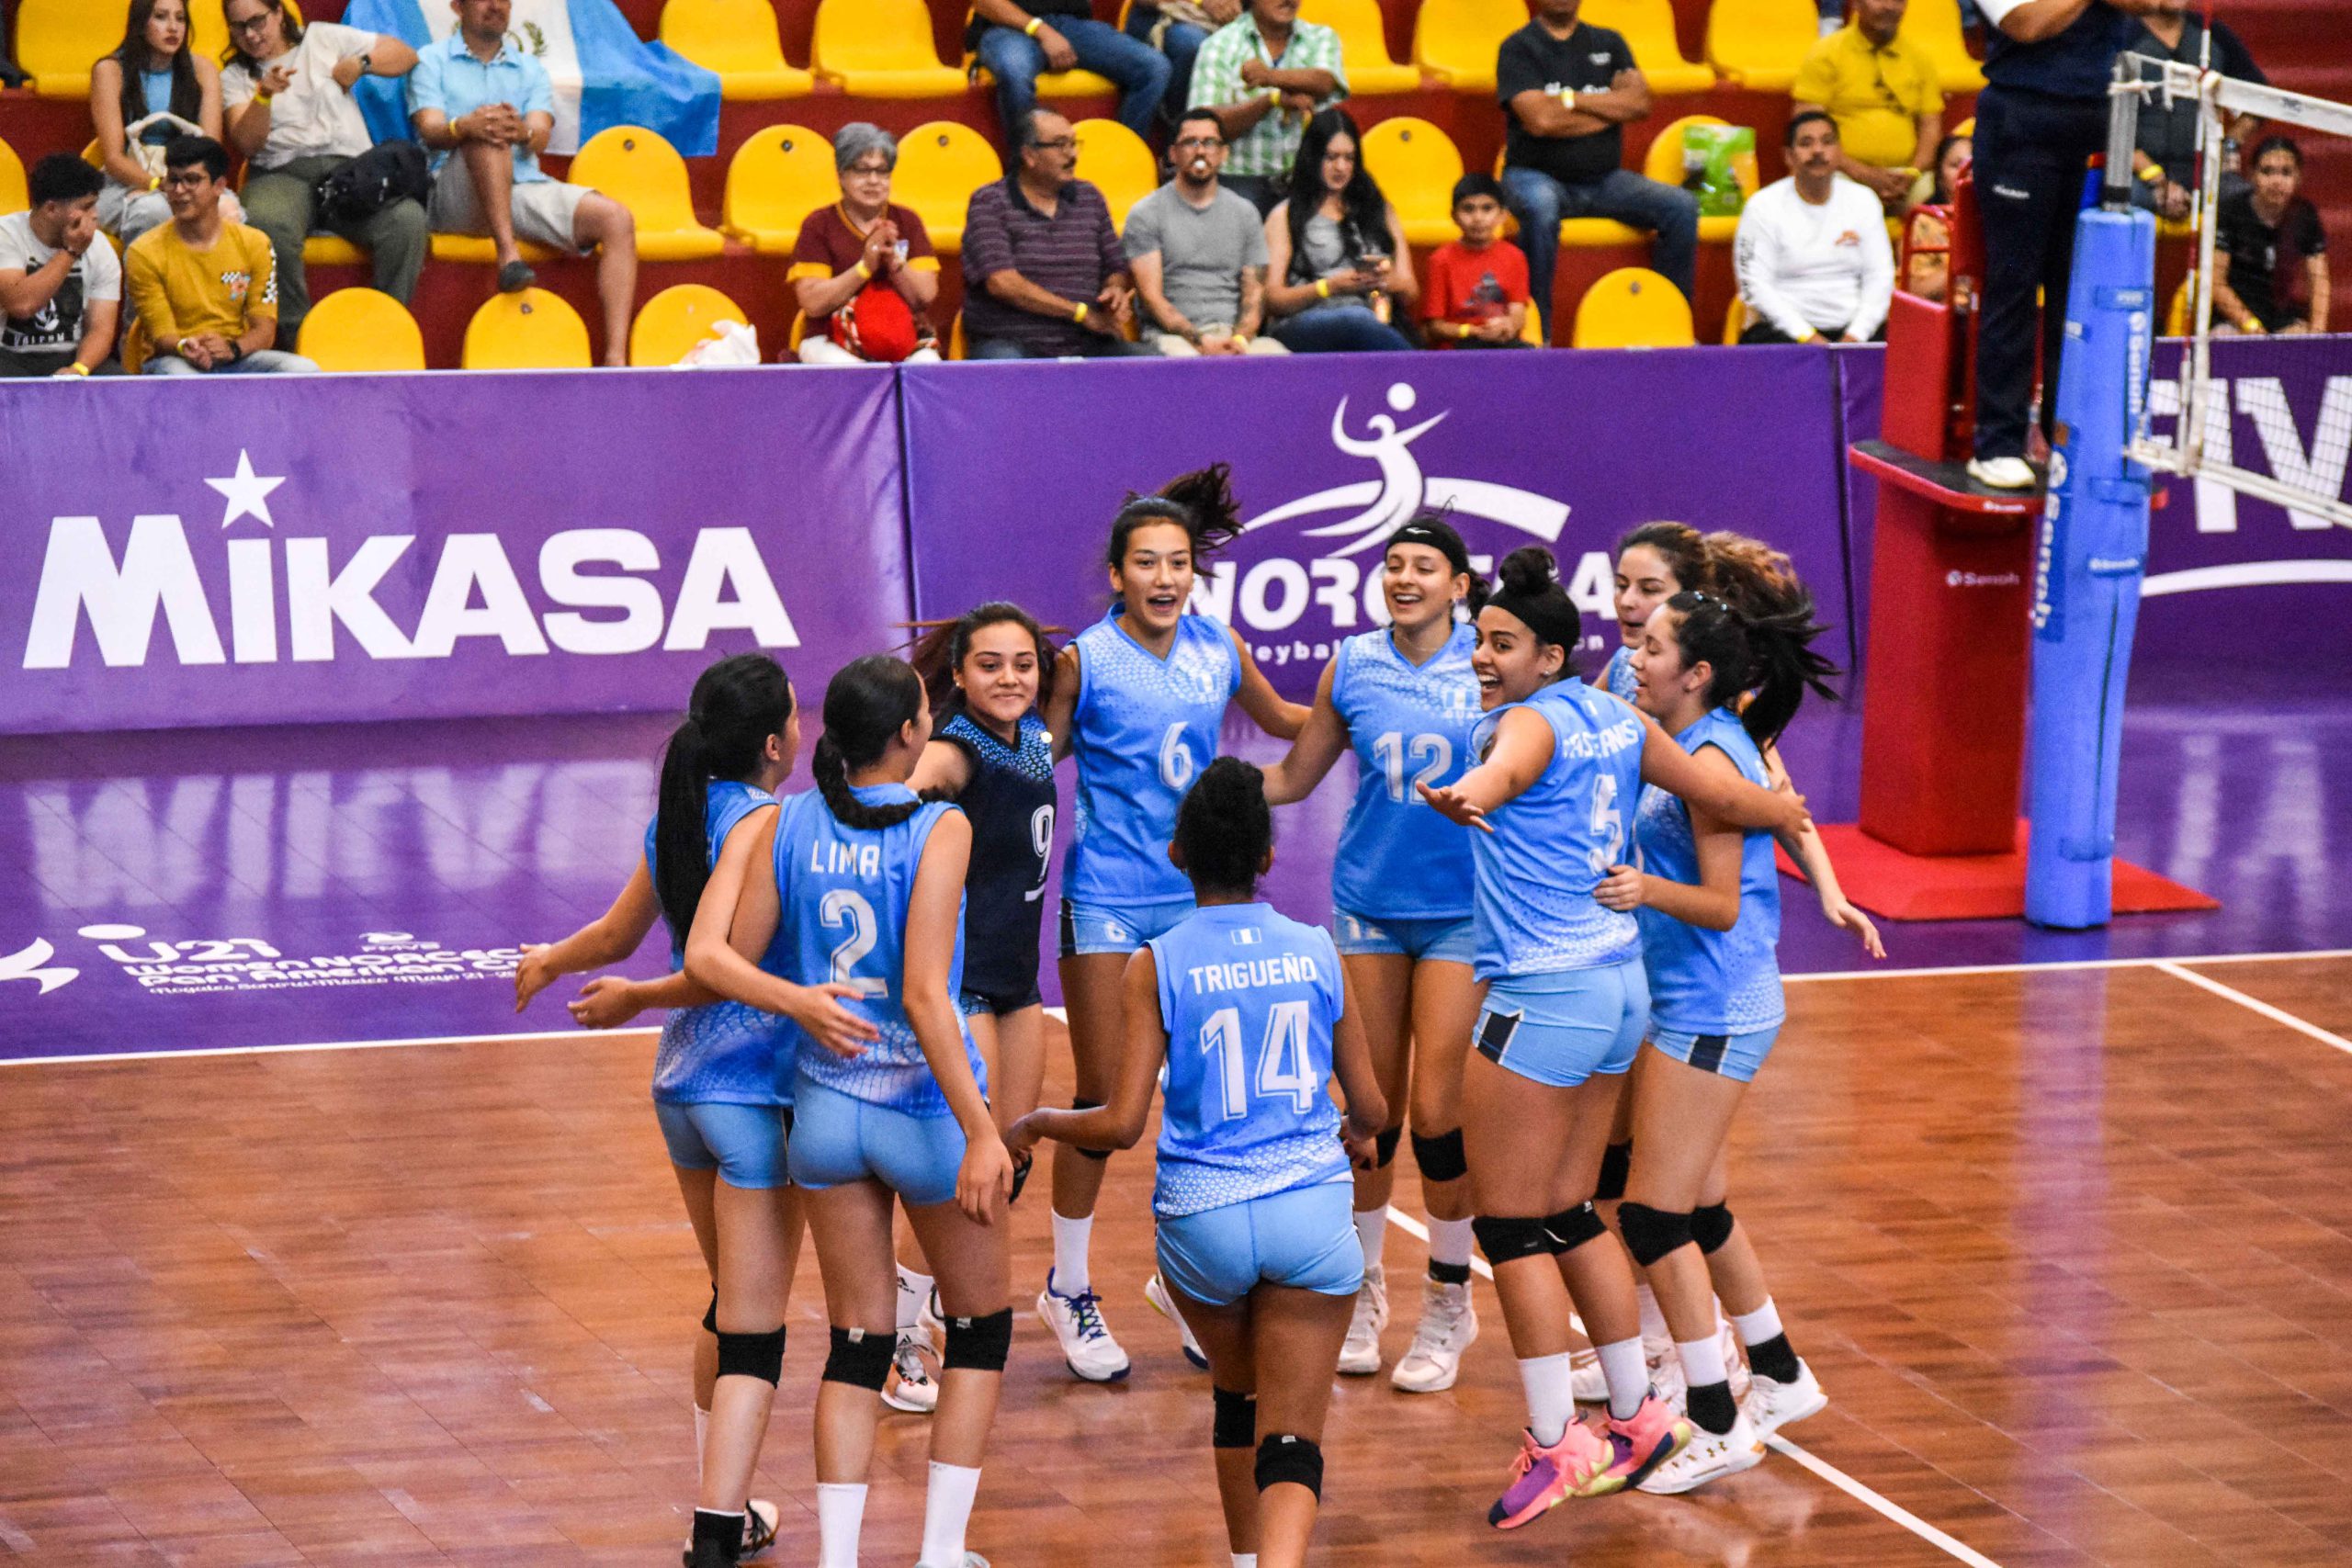 Guatemala seventh place defeating Belize